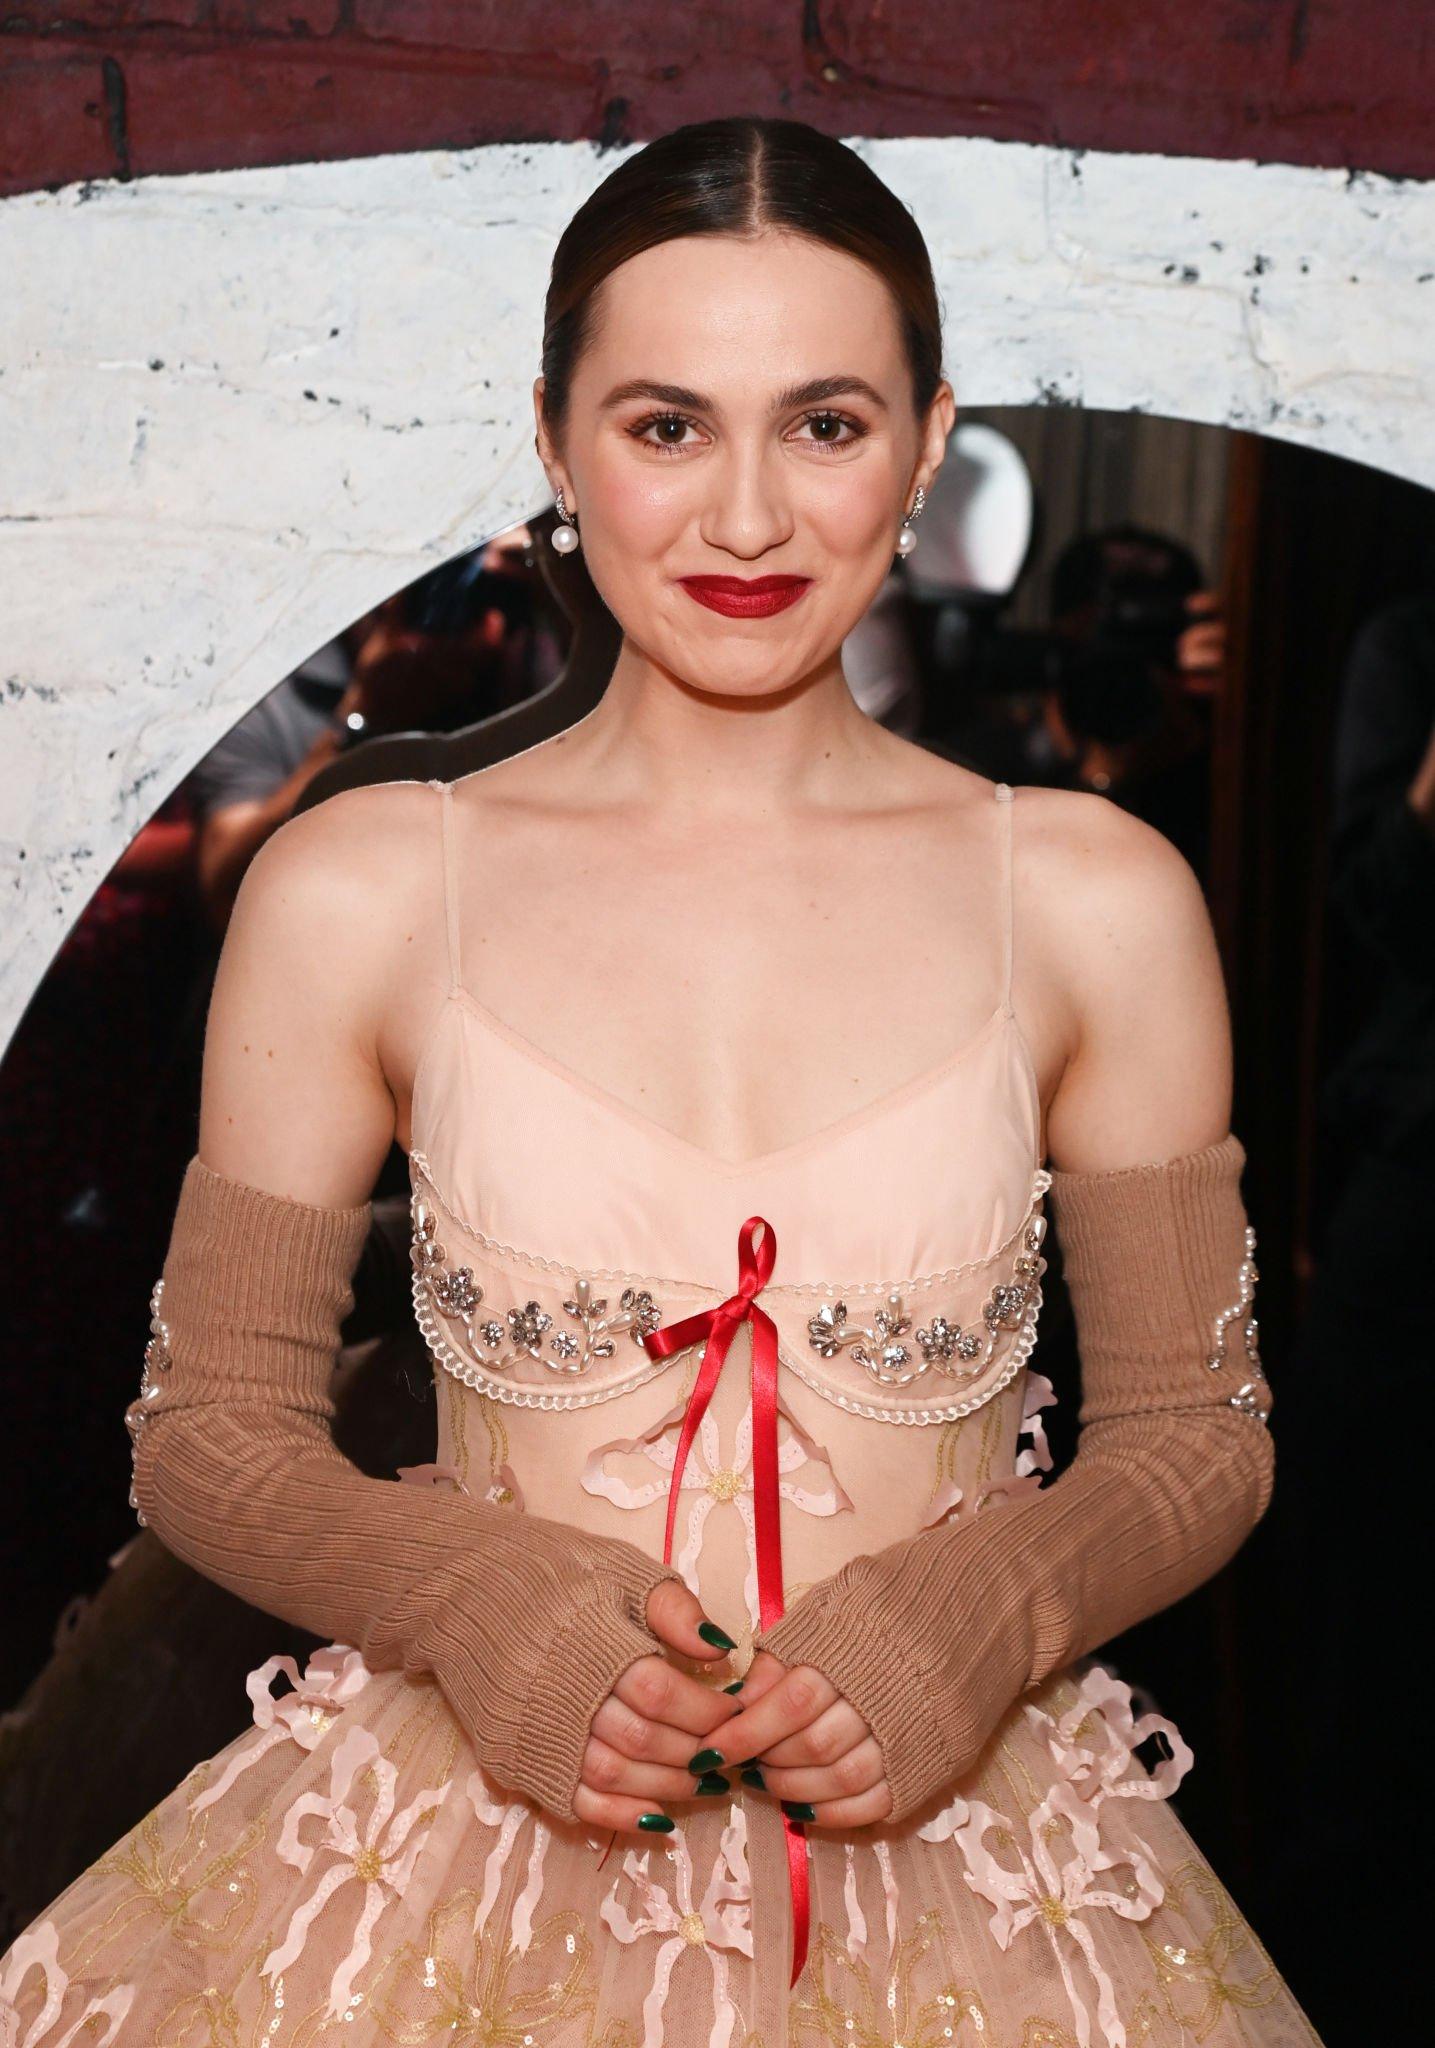 reverie on X: Maude Apatow attending an afterparty celebrating a